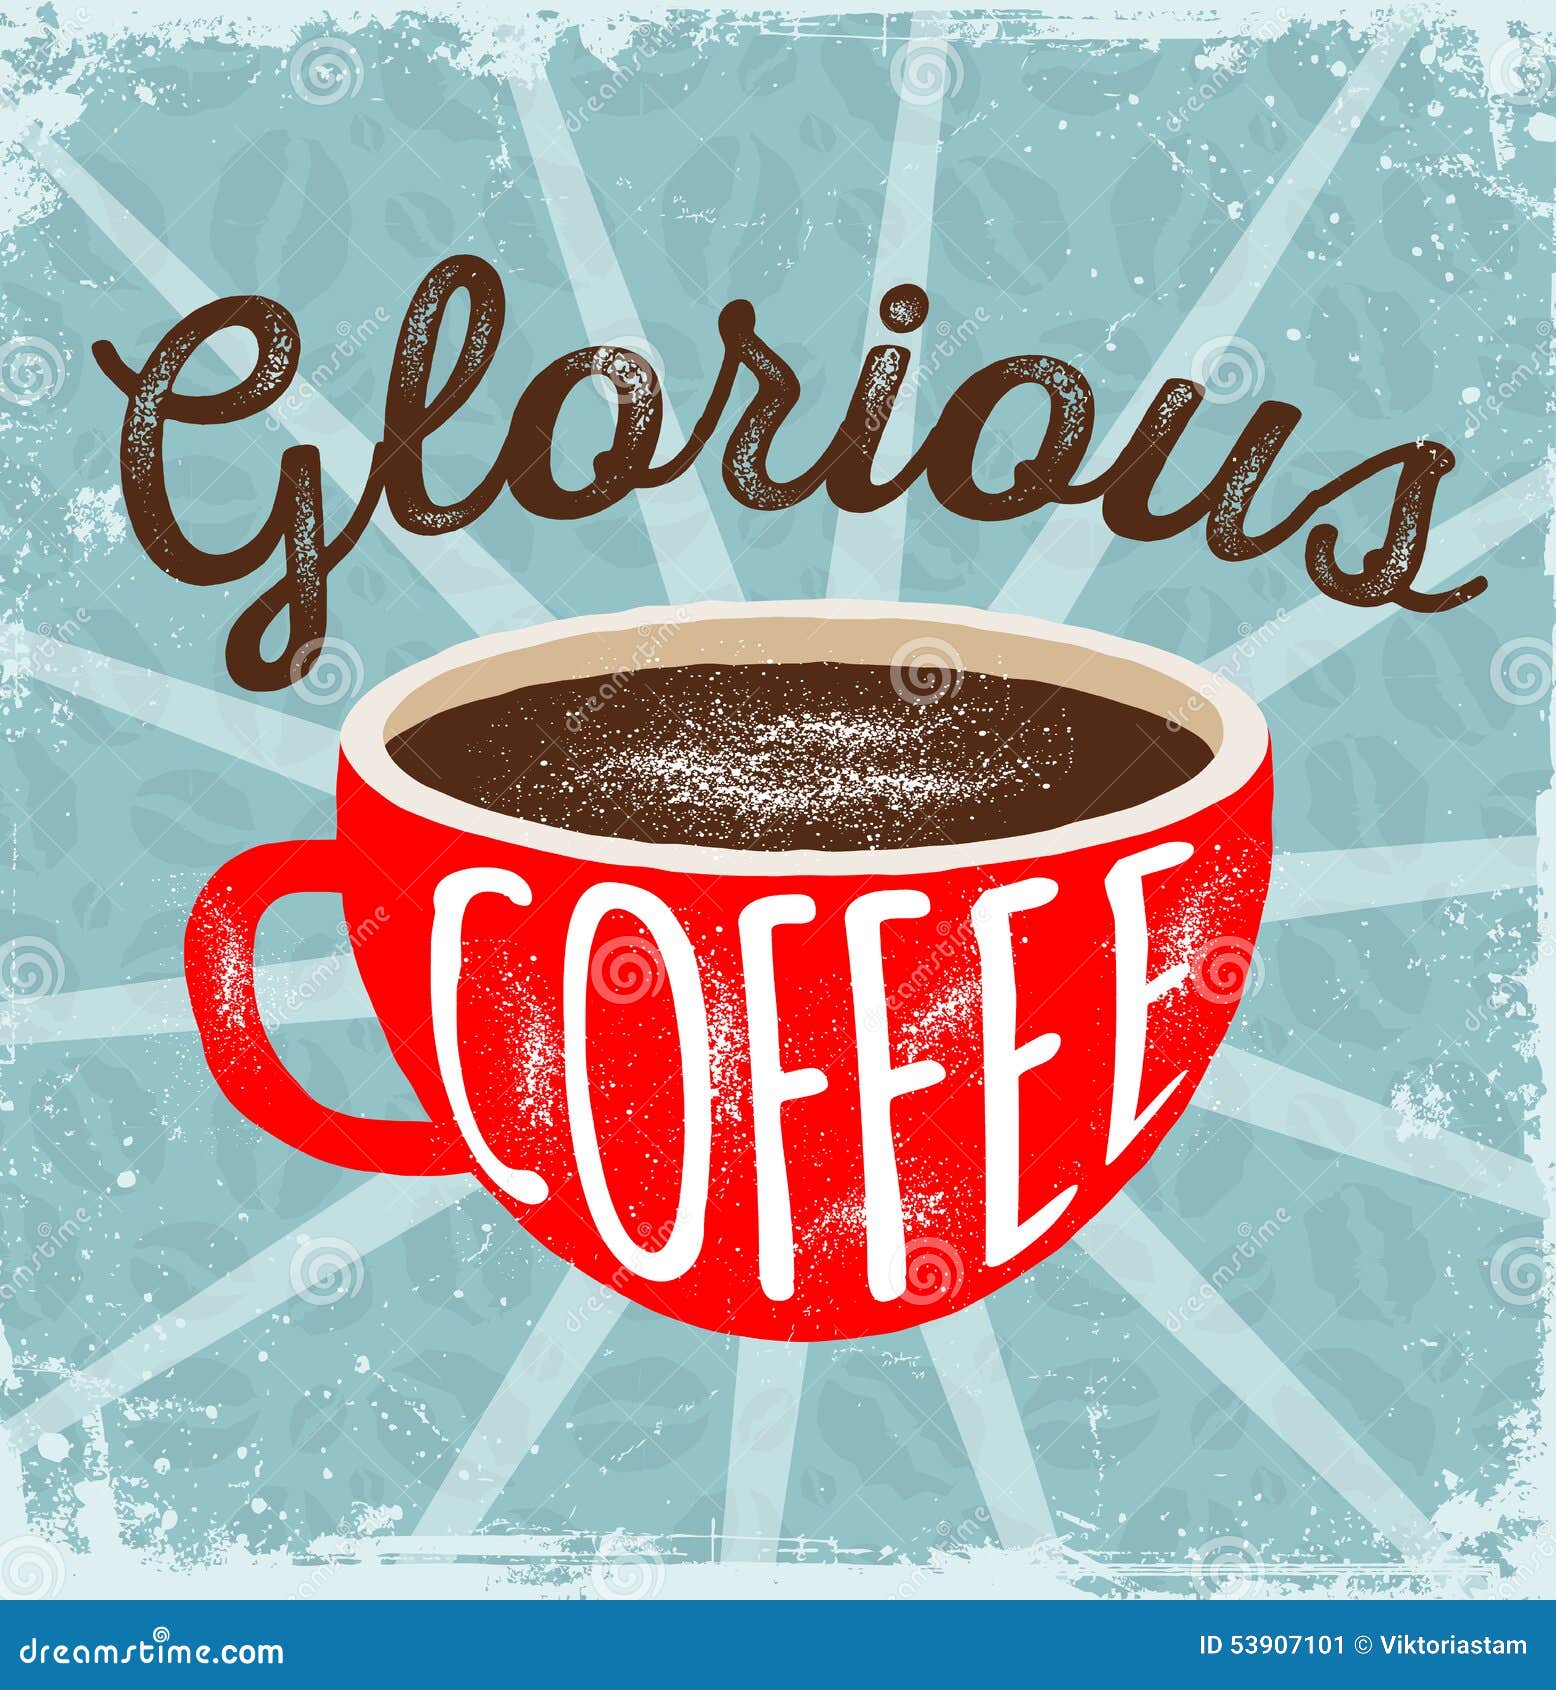 inspirational-vector-quote-glorious-coffee-poster-53907101.jpg